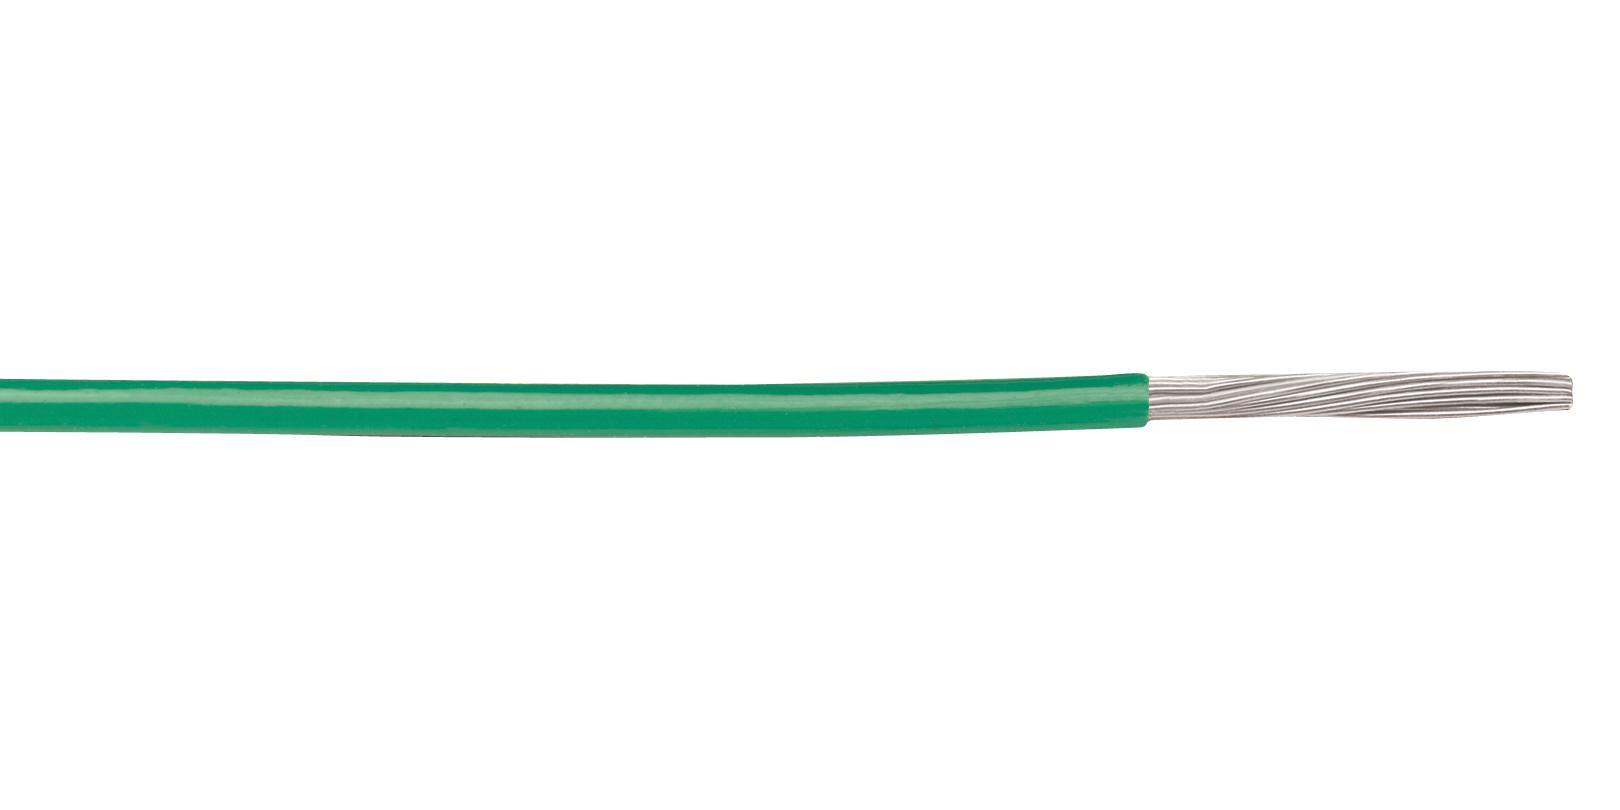 6830 GY001 HOOK-UP WIRE, 12AWG, GRN/YEL, 305M ALPHA WIRE